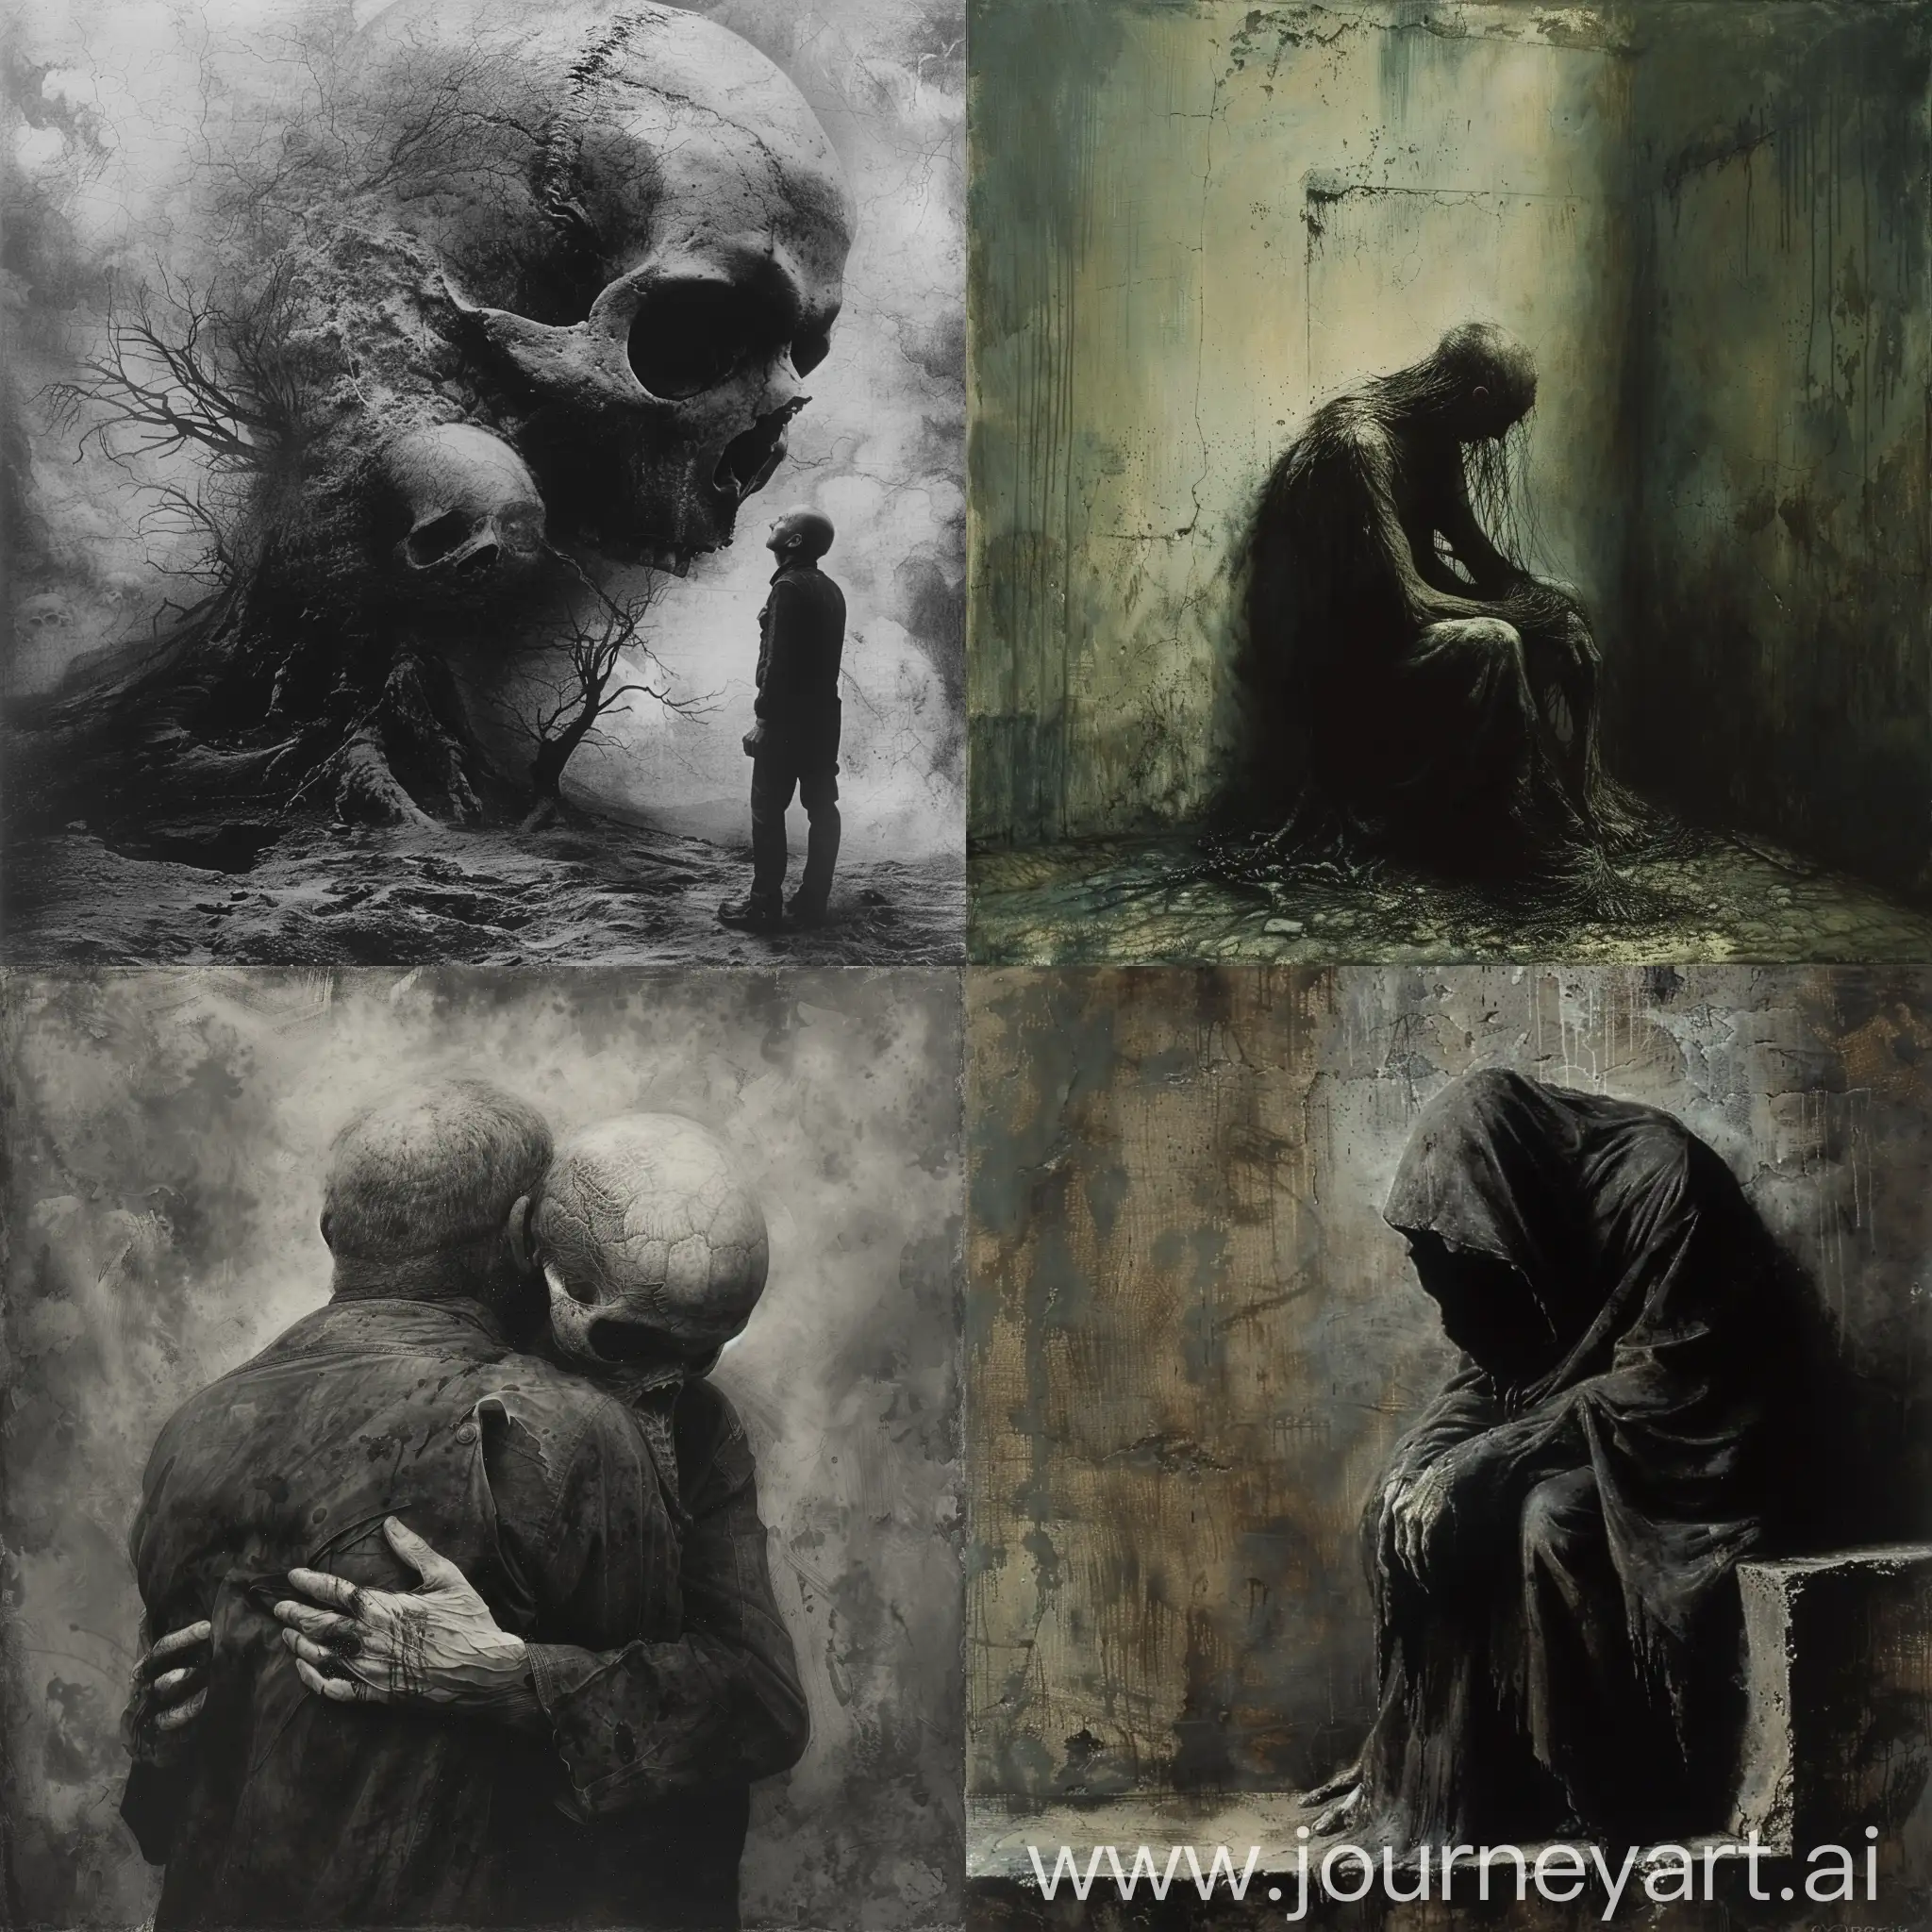 To breathe and yet feel dead is worse than to be a ghost and not feel at all. Beksinski grotesque haunting unsettling dark.